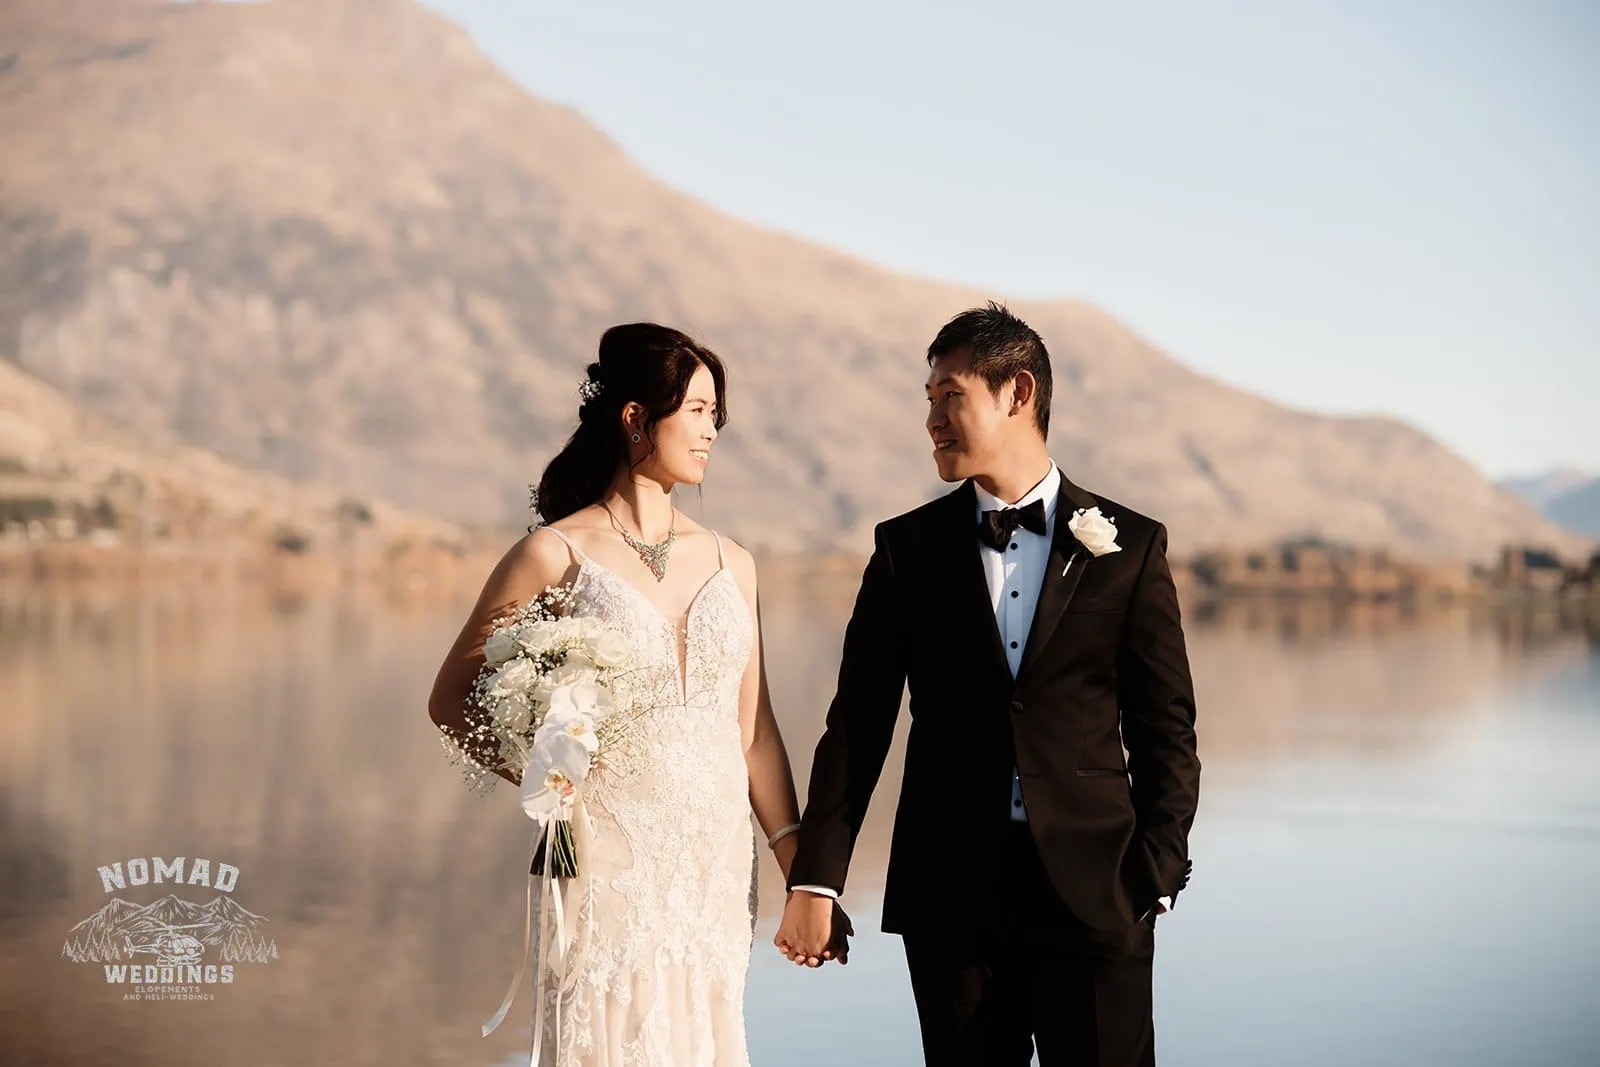 Connie and Andrew celebrating their love with a captivating Pre Wedding Shoot by The Remarkables Heli, near a serene lake, while holding hands.